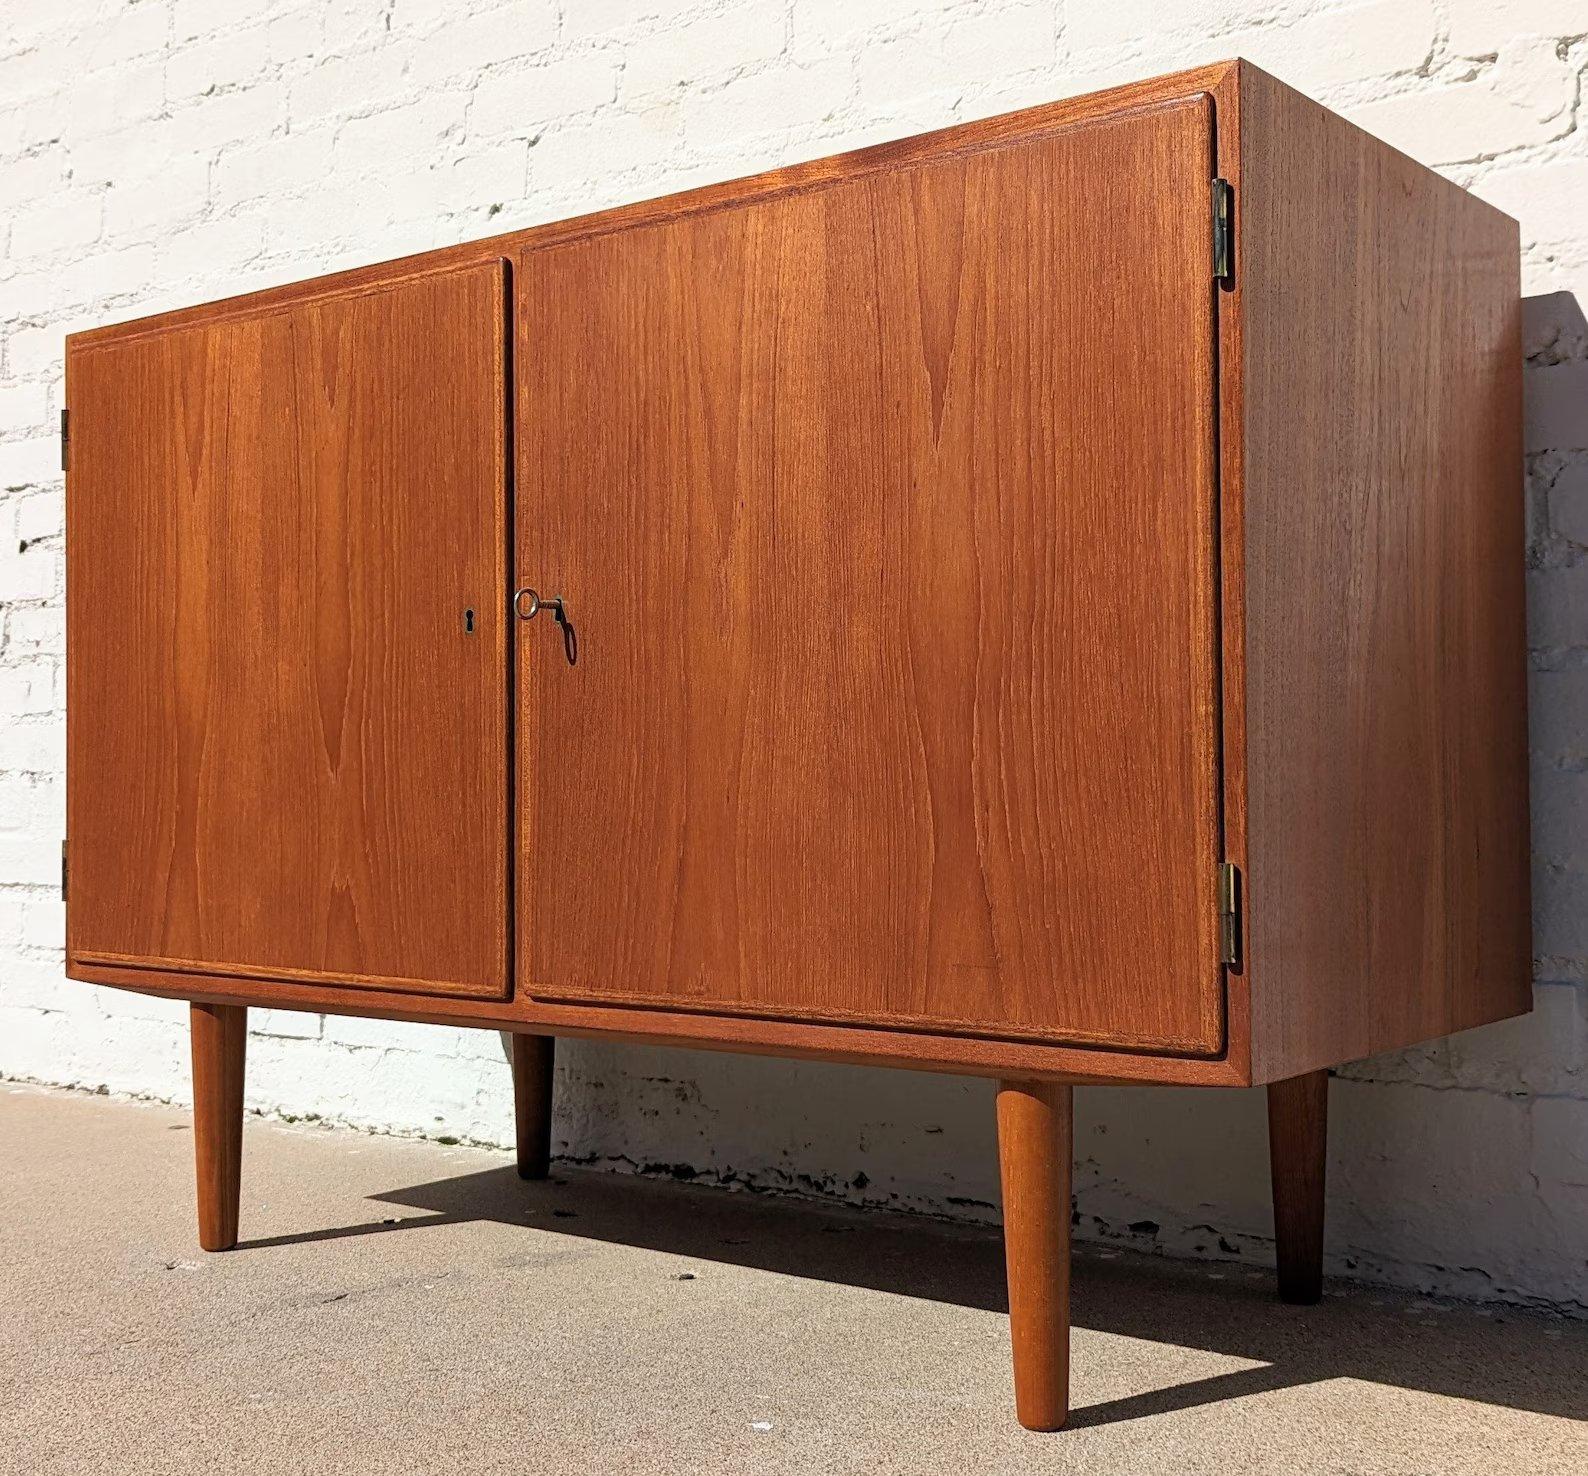 Mid Century Danish Modern Teak Cabinet

Above average vintage condition and structurally sound. Has some expected slight finish wear and scratching. Has a couple small dings on top. Top has been refinished. Outdoor listing pictures might appear